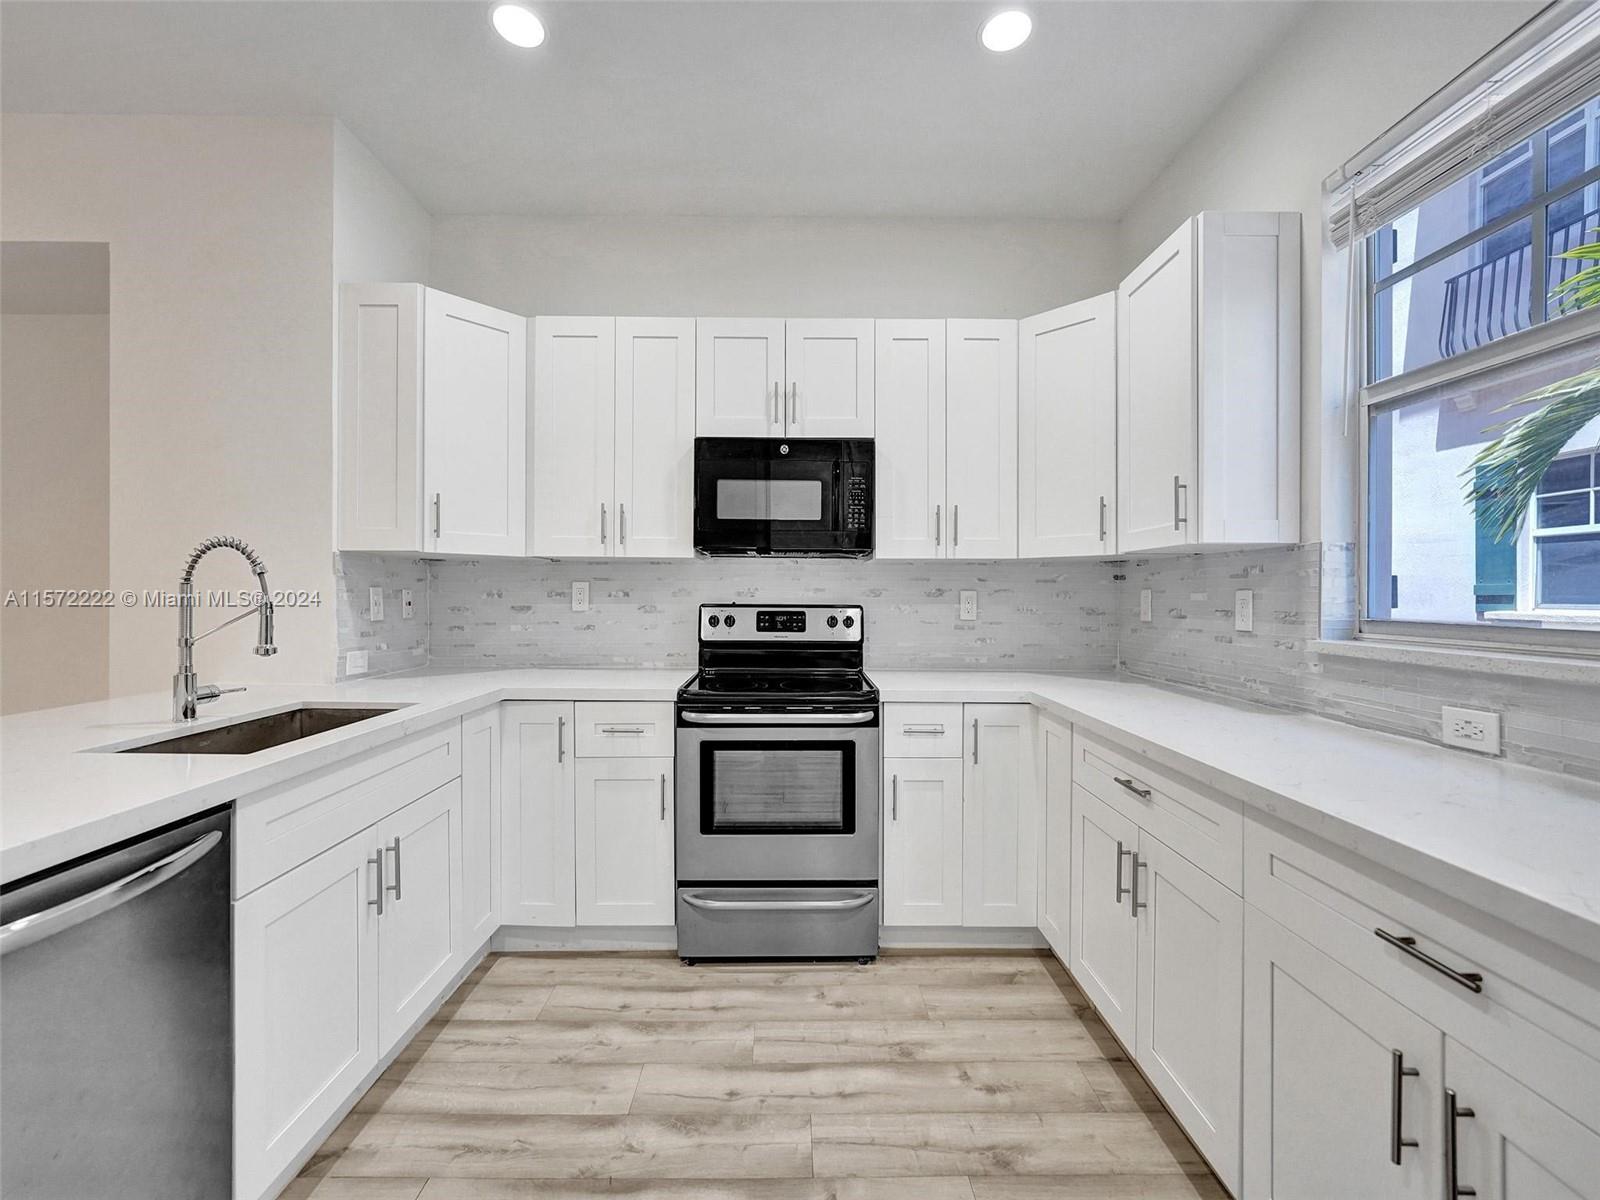 a kitchen with stainless steel appliances granite countertop a stove top oven a sink and dishwasher with white cabinets